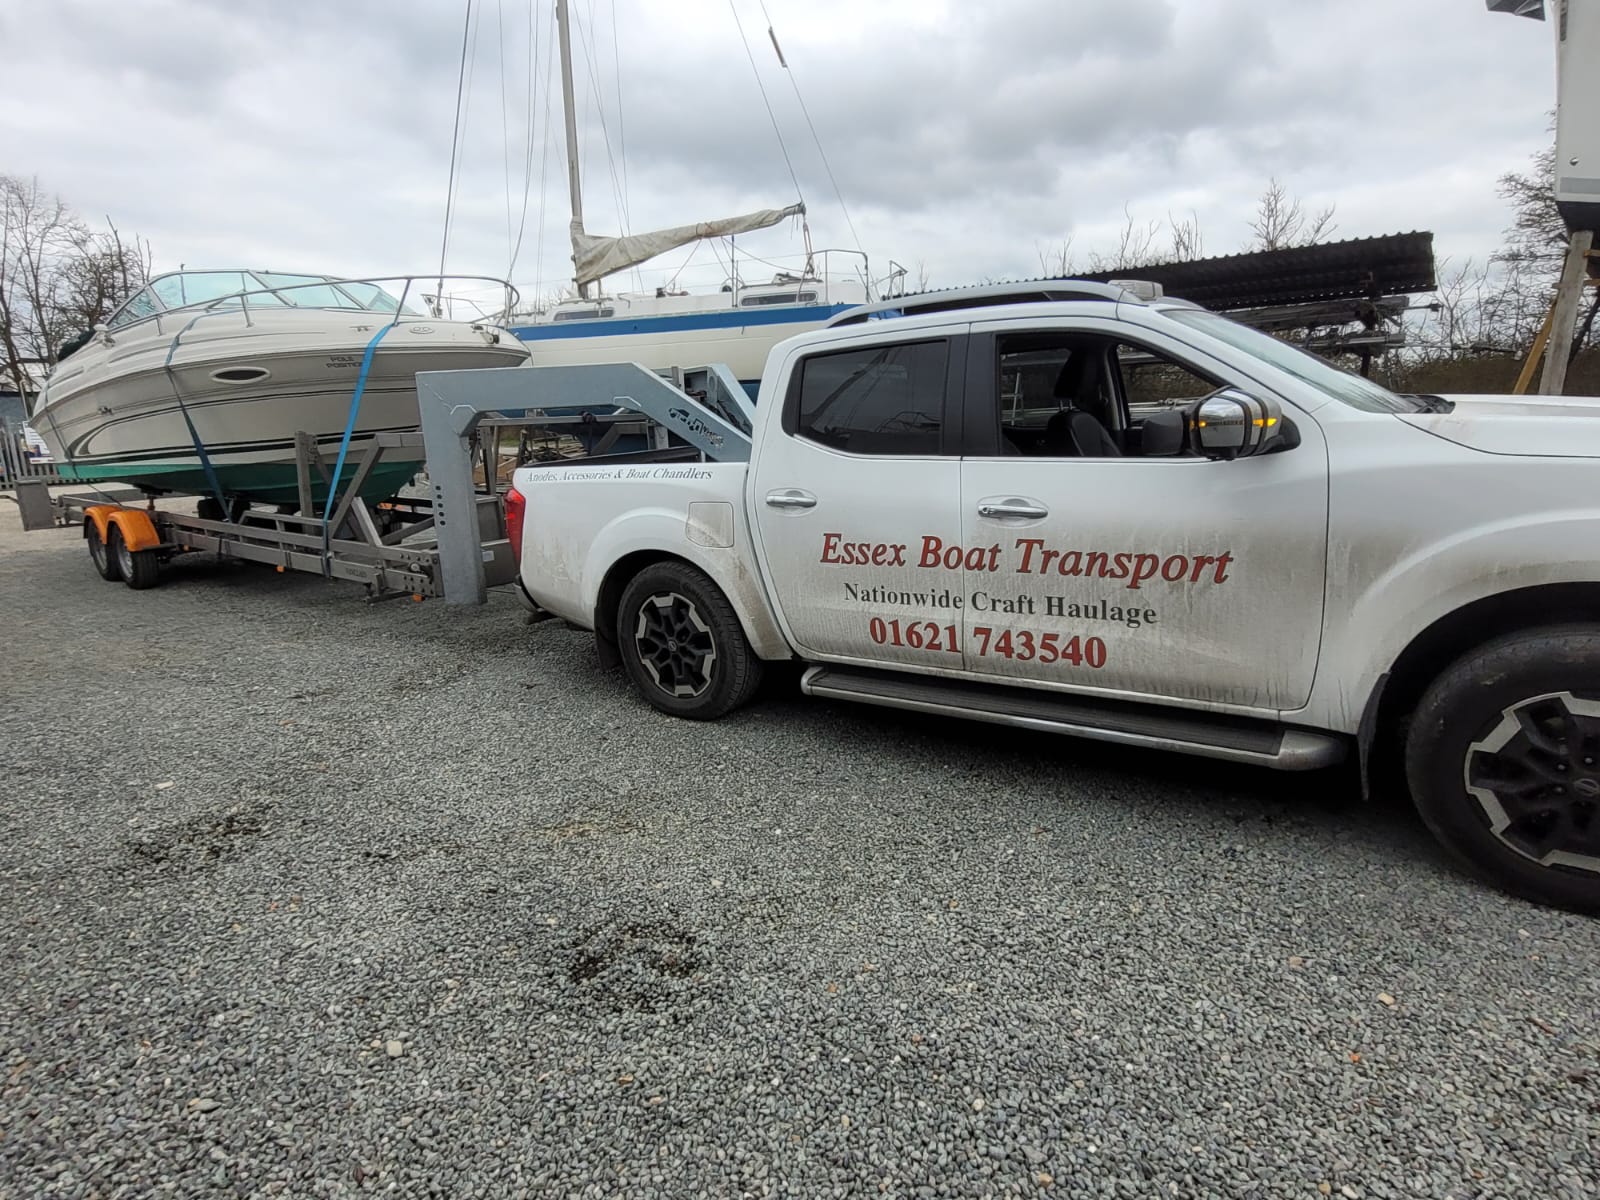 Essex Boat Transport new trailor with customers boat